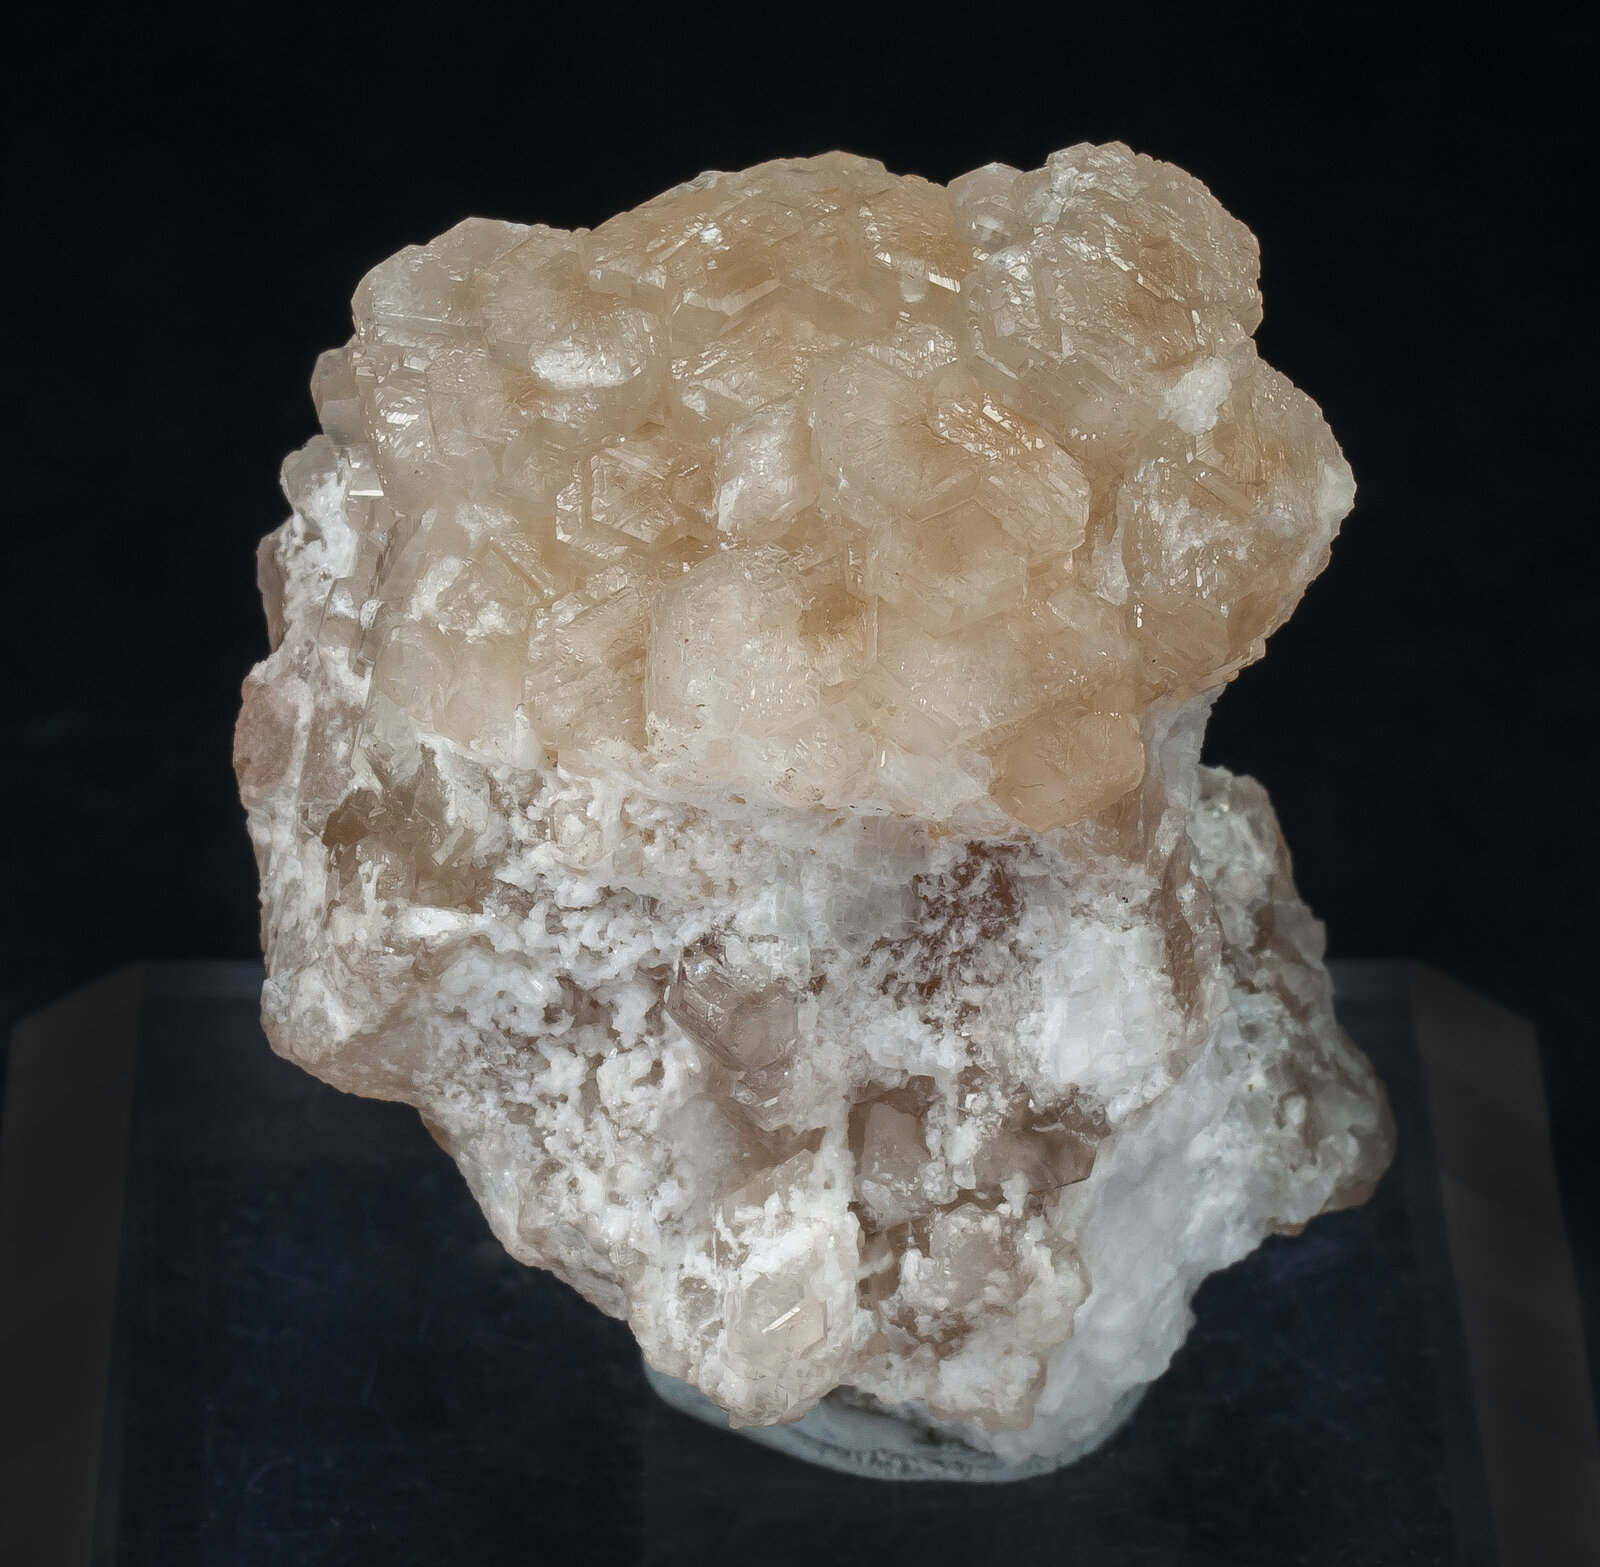 specimens/s_imagesAN1/Strontianite-CP86AN1f.jpg